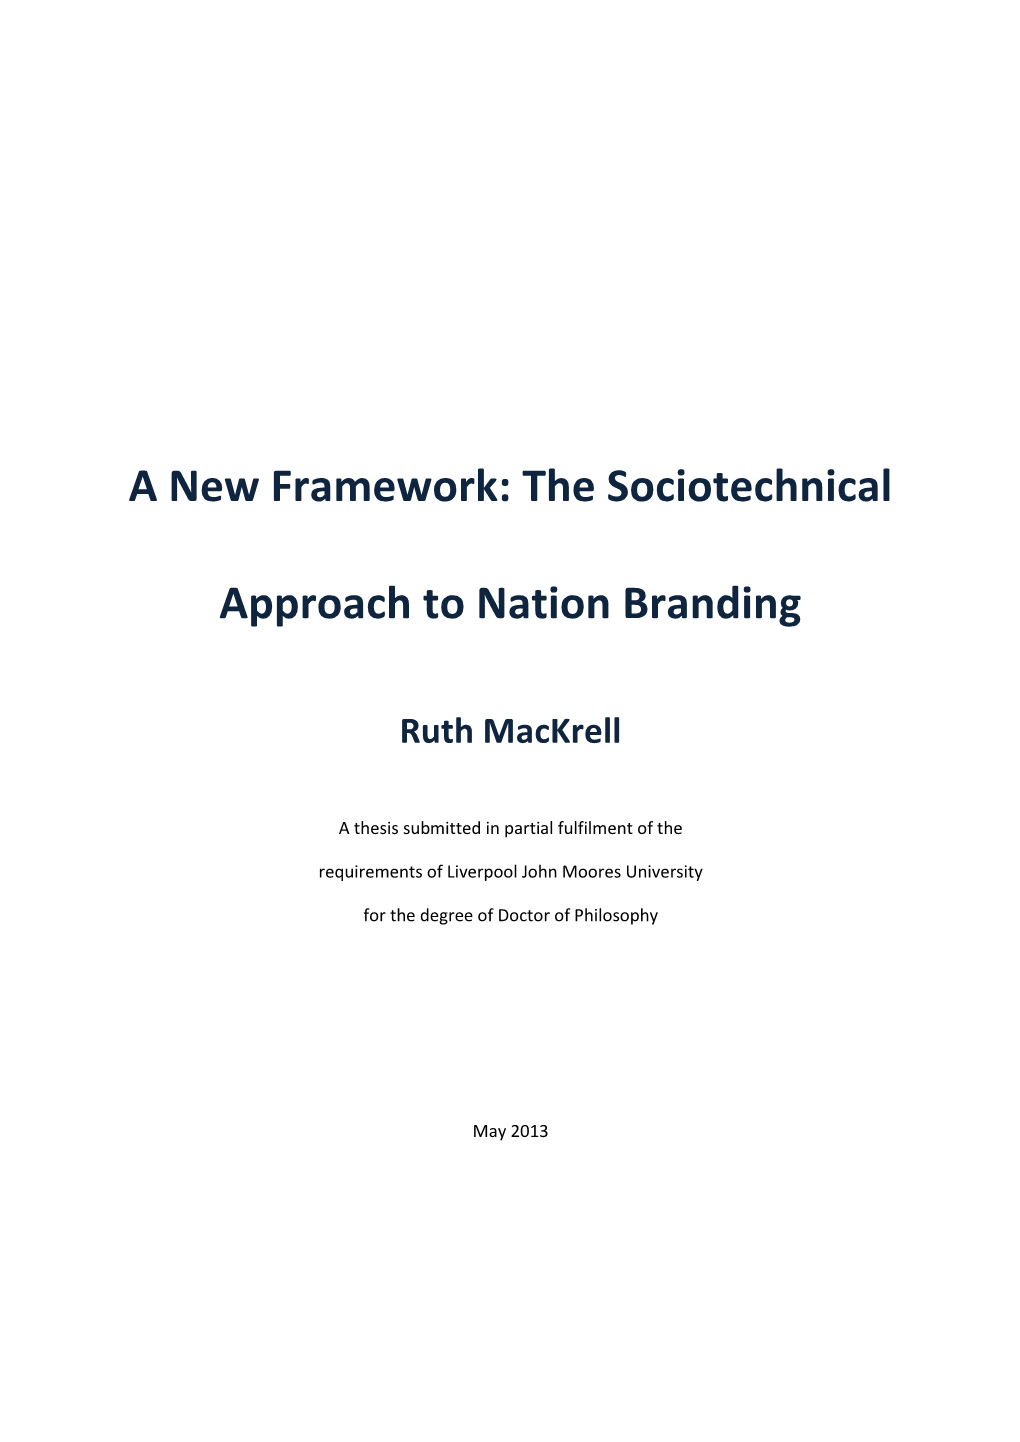 The Sociotechnical Approach to Nation Branding (2.8)